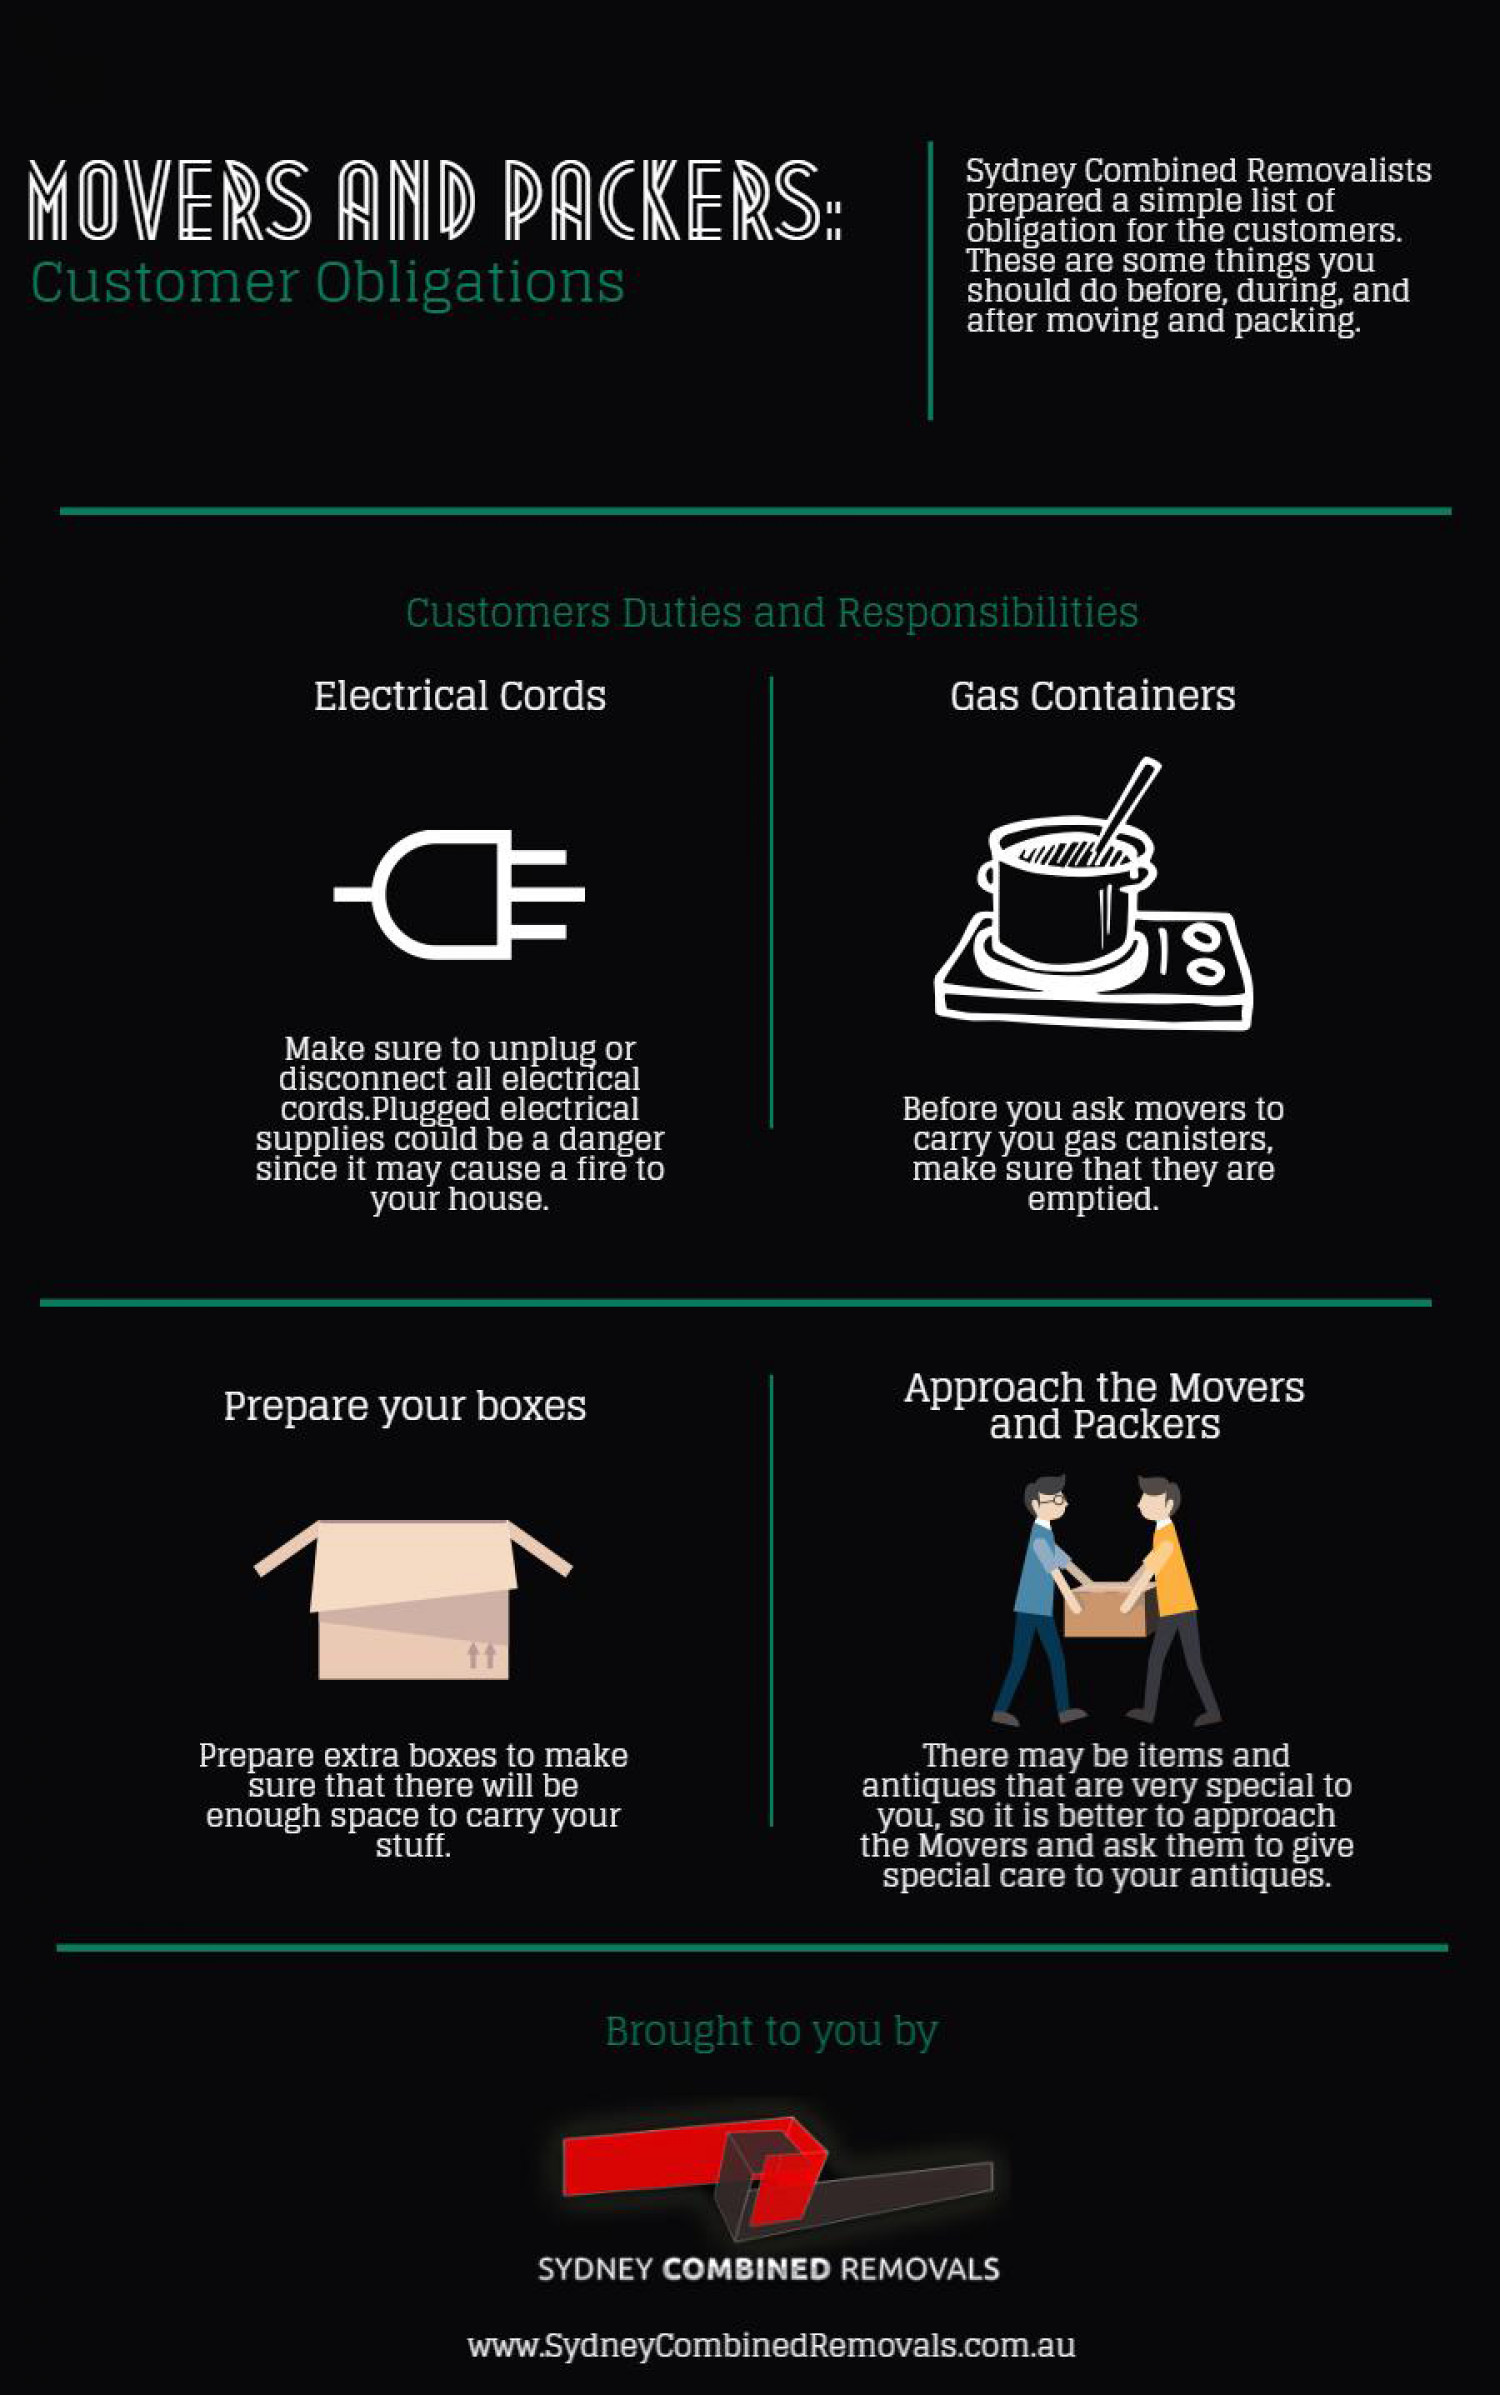 Movers and Packers: Customer Obligations Infographic